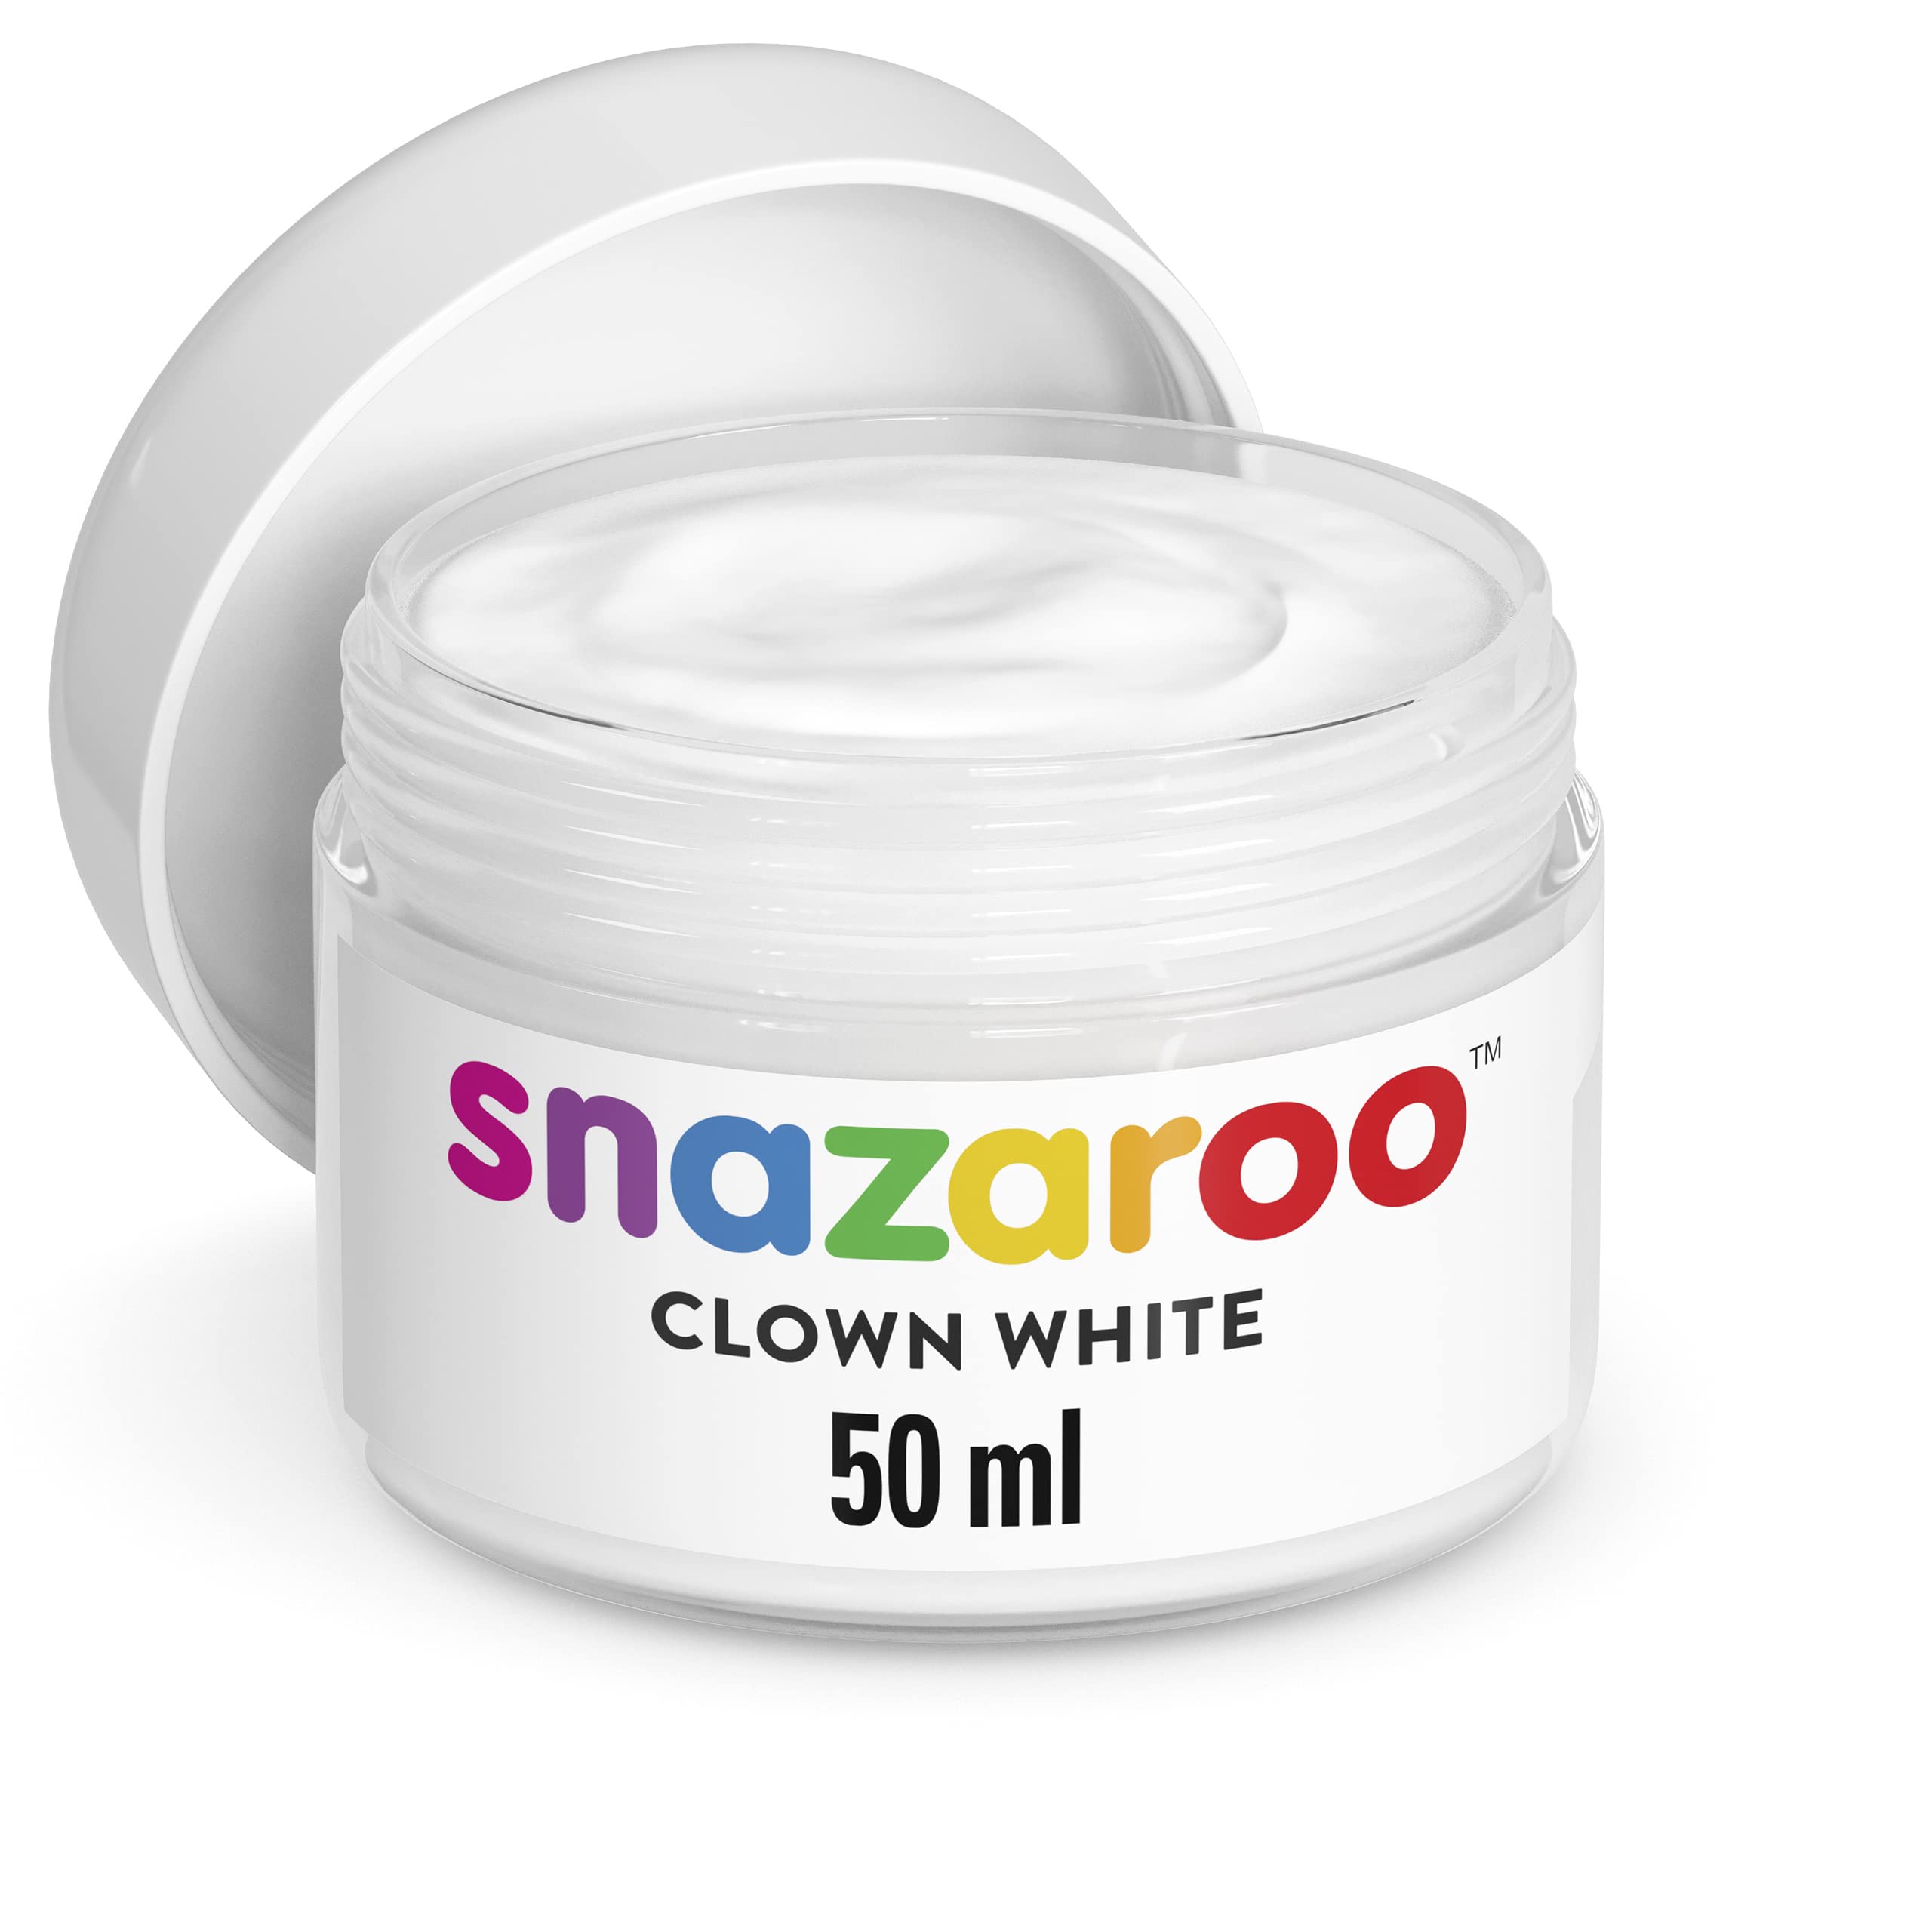 Snazaroo Face and Body Paint, Clown White, 50ml, 1.69 Fl Oz (Pack of 1)